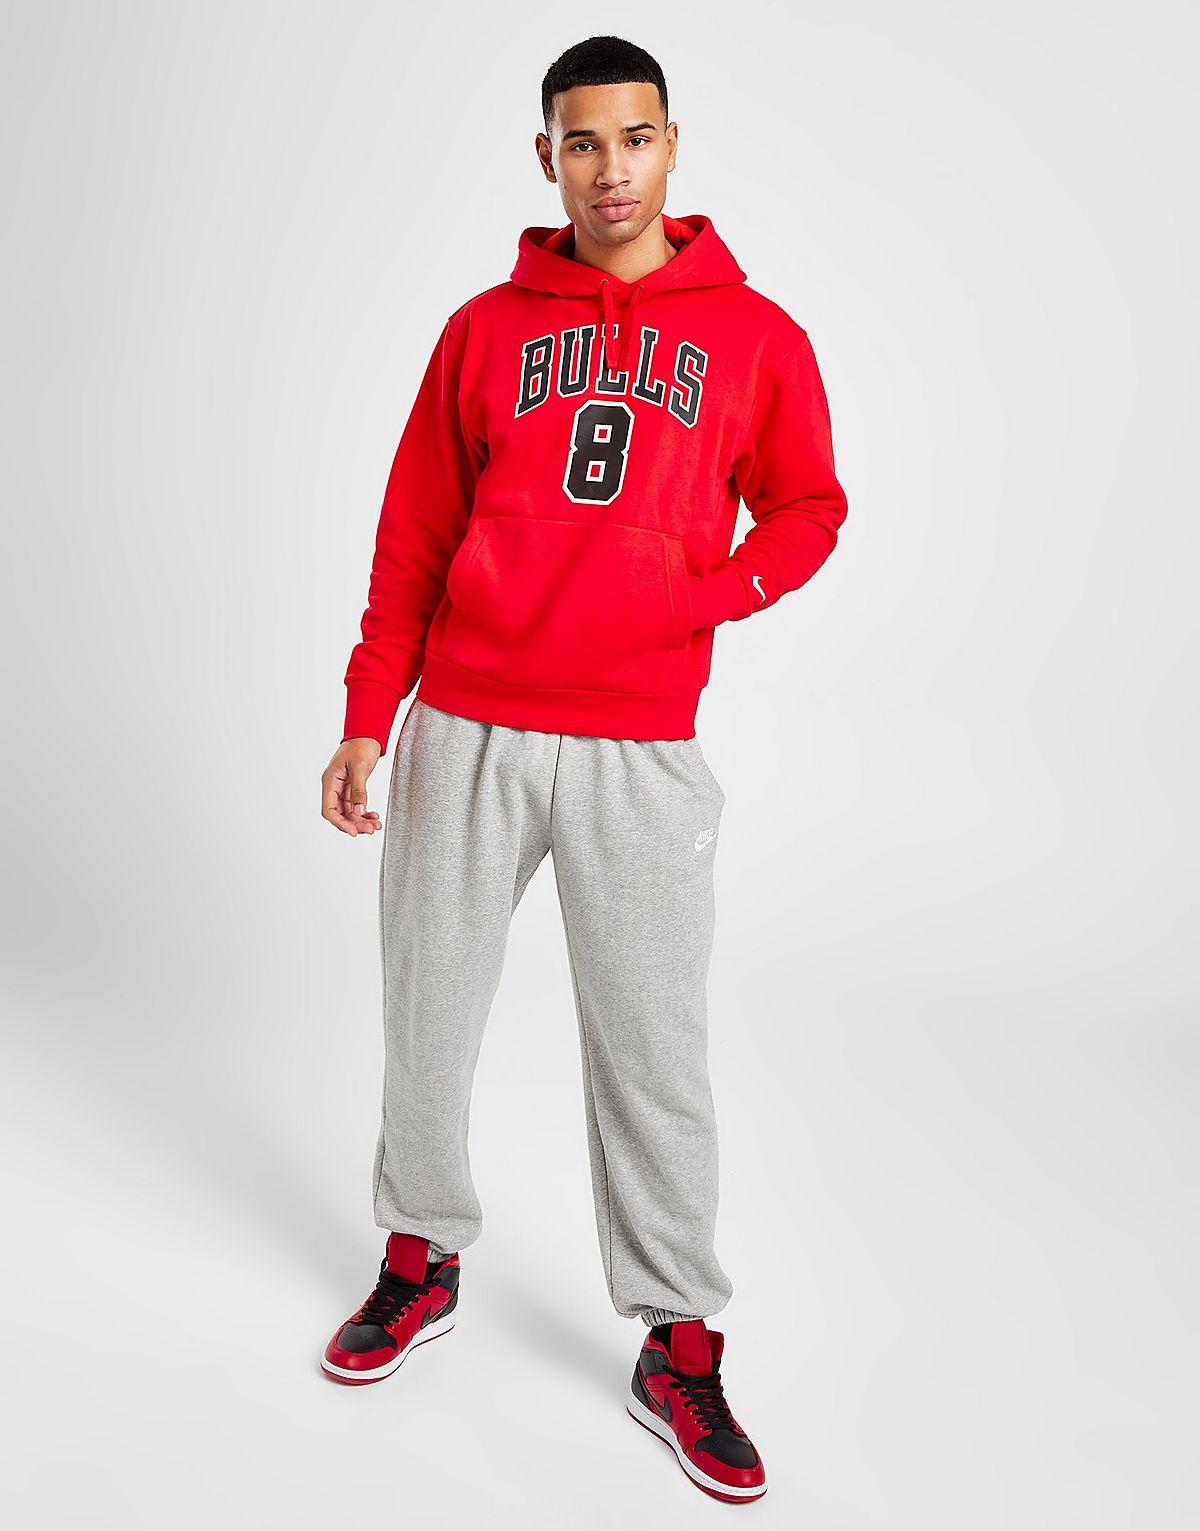 Nike Nba Chicago Bulls Lavine #8 Pullover Hoodie in Red for Men